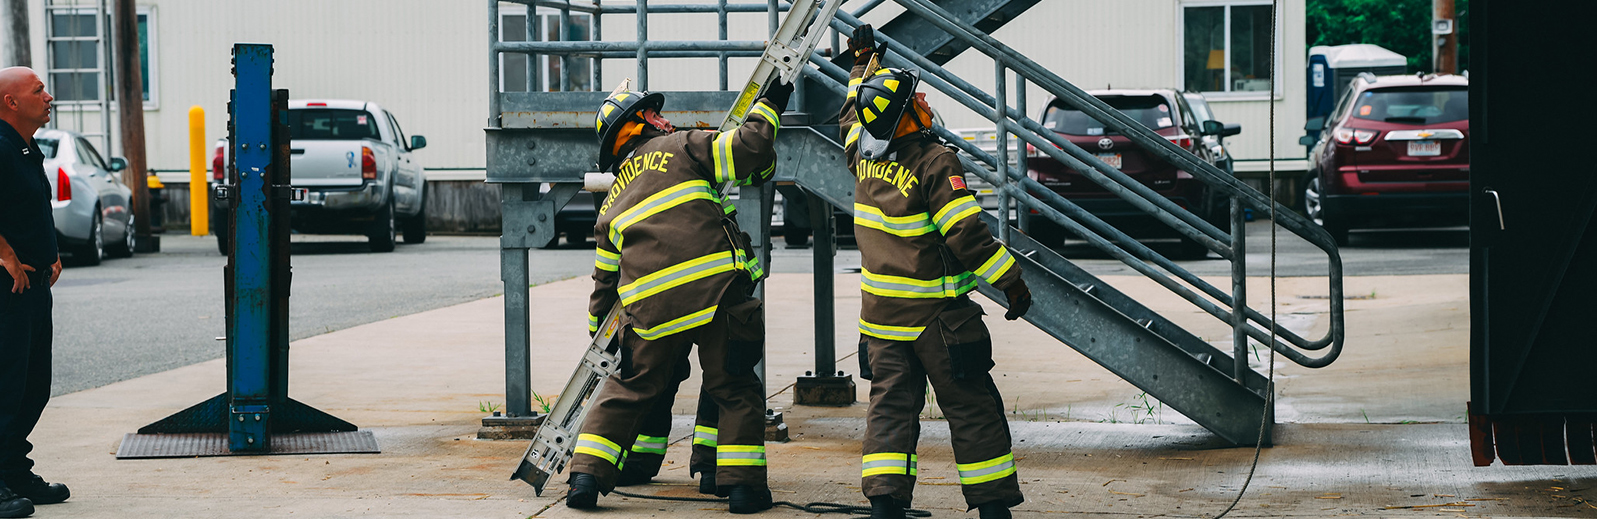 two firefighters holding up a ladder